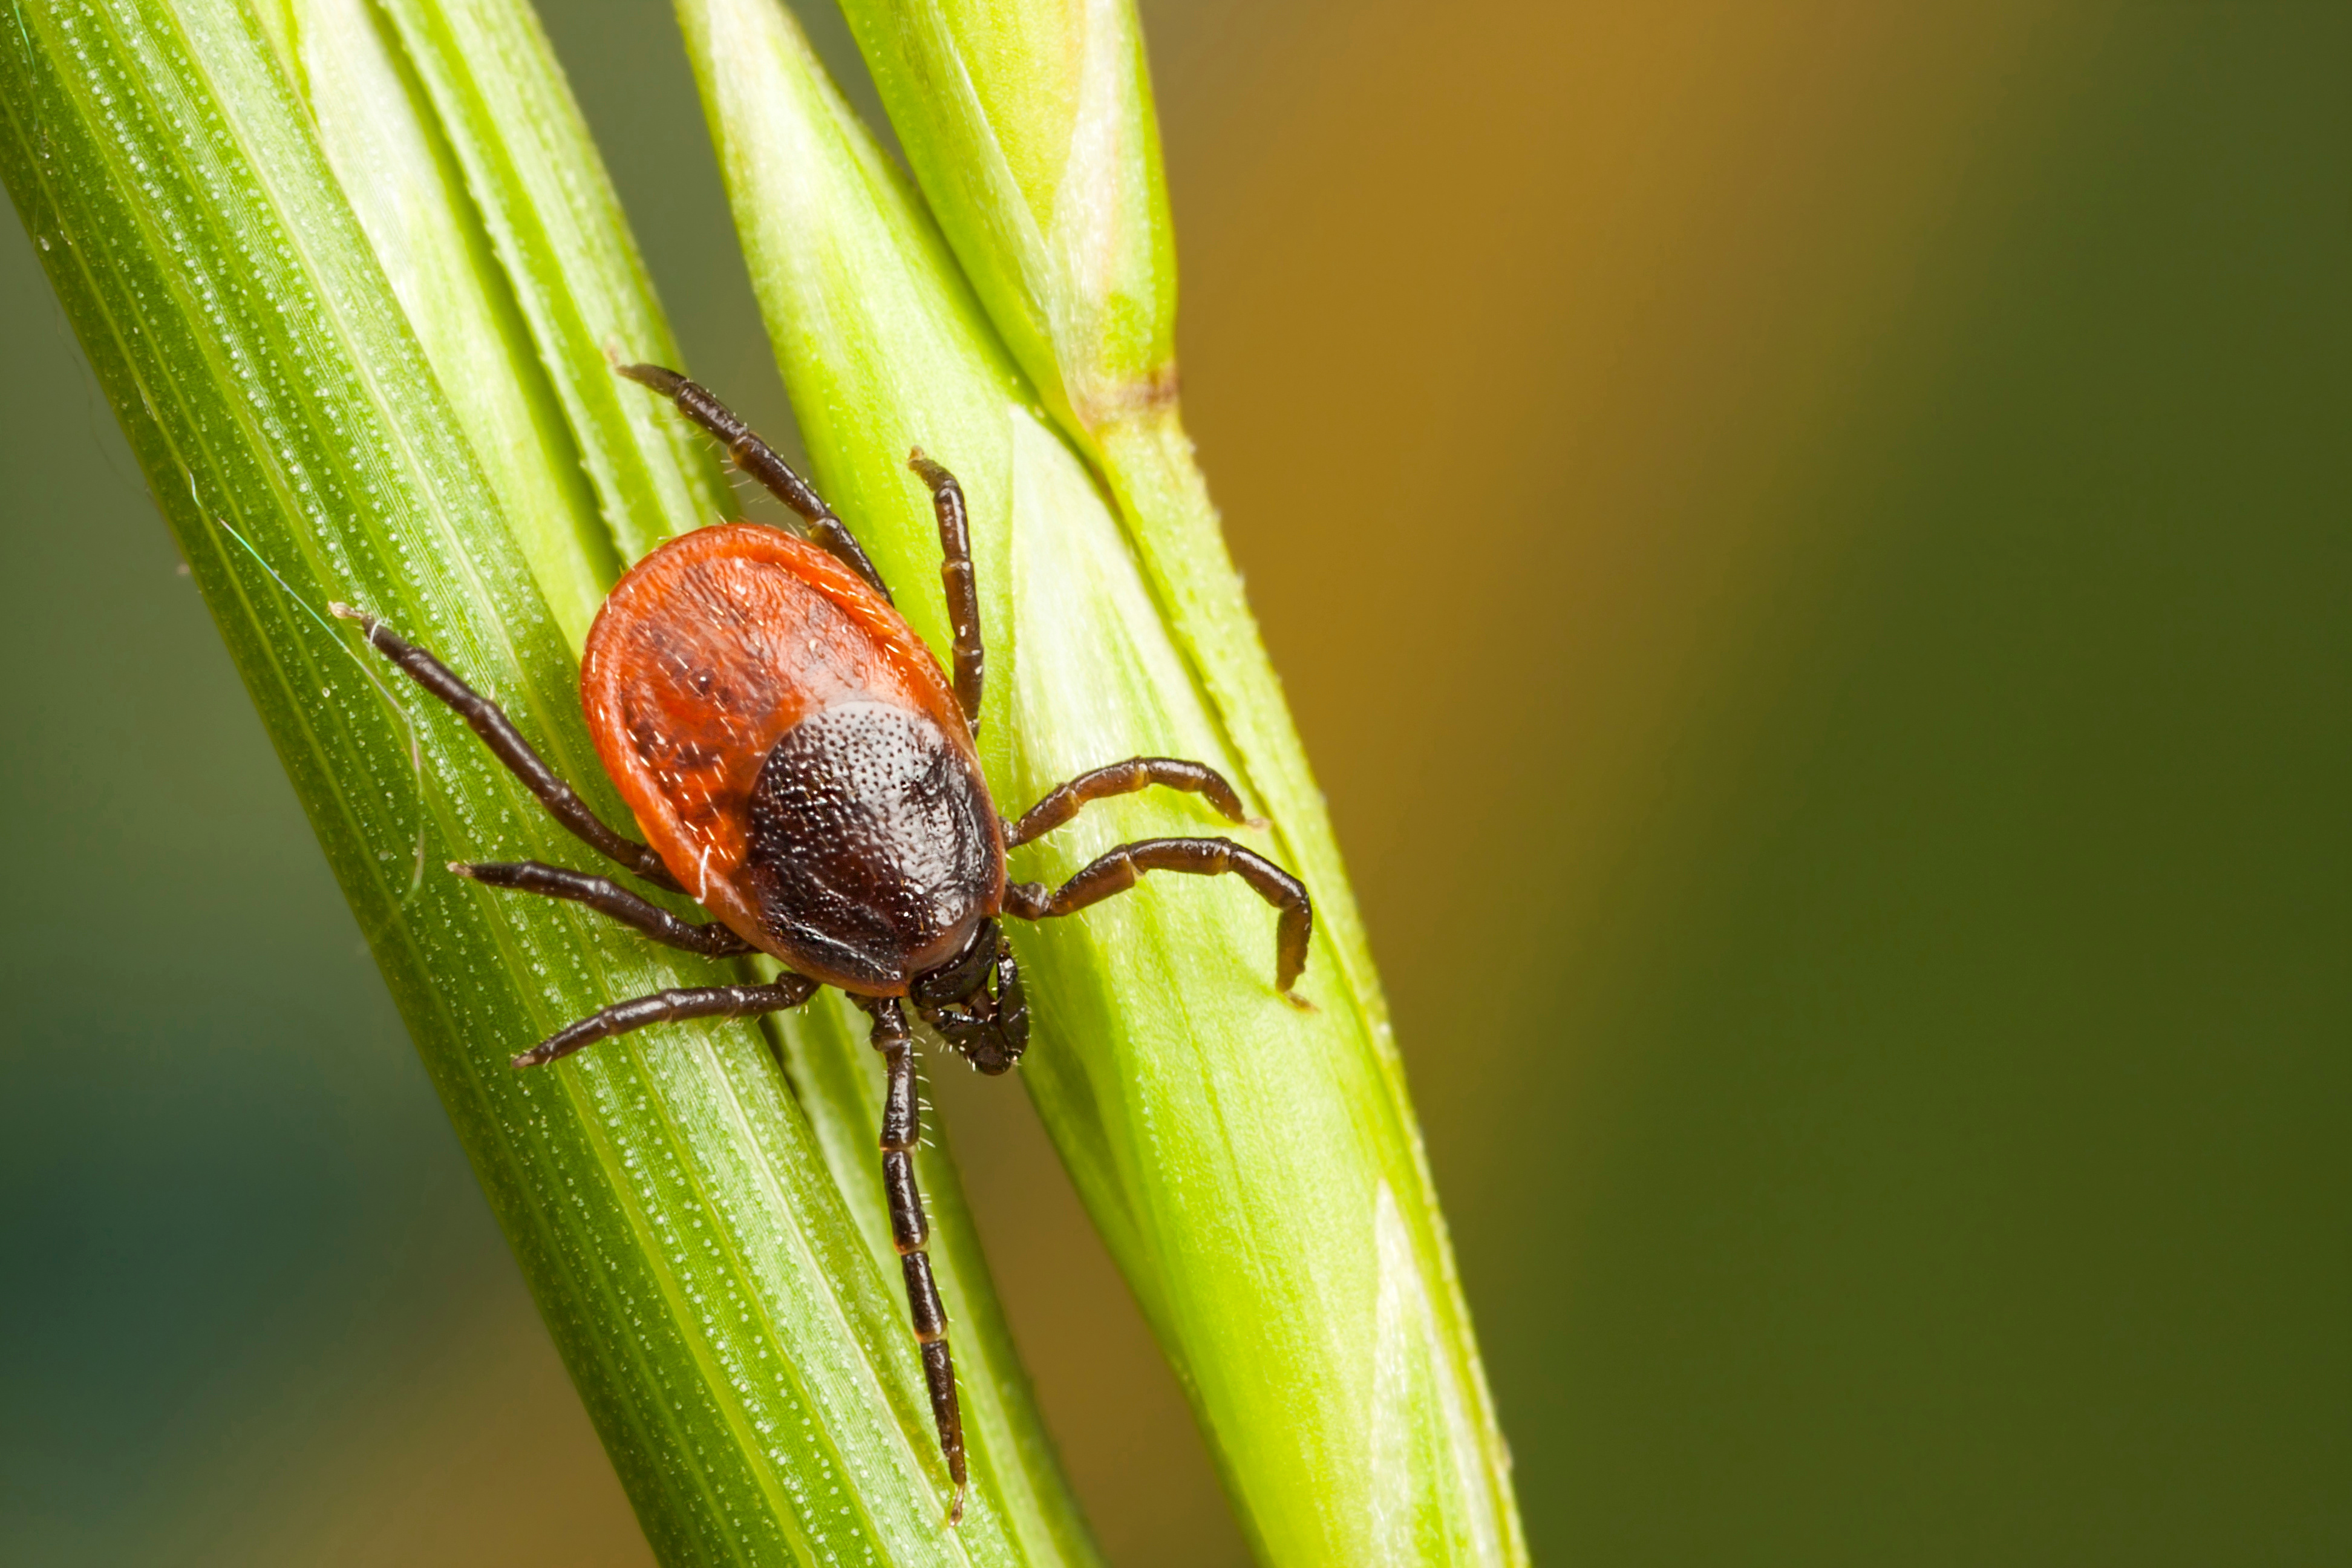 A tick on a leaf - do you need tick pest control in Temple, TX? Contact GGA Pest Management Temple today!